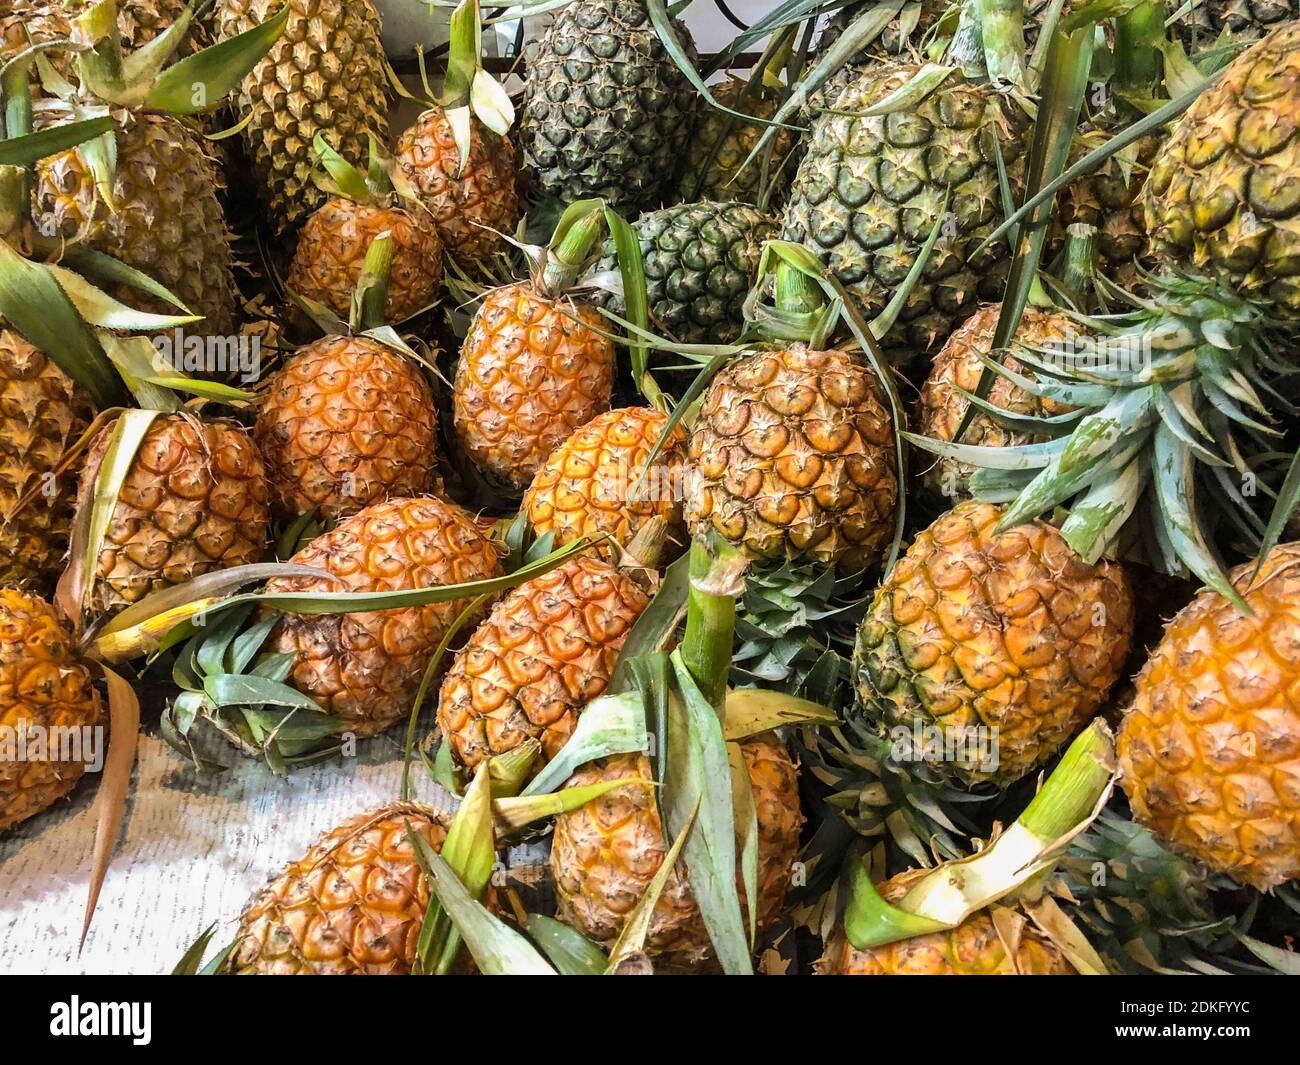 Close-up Of Fruits For Sale In Market Stock Photo